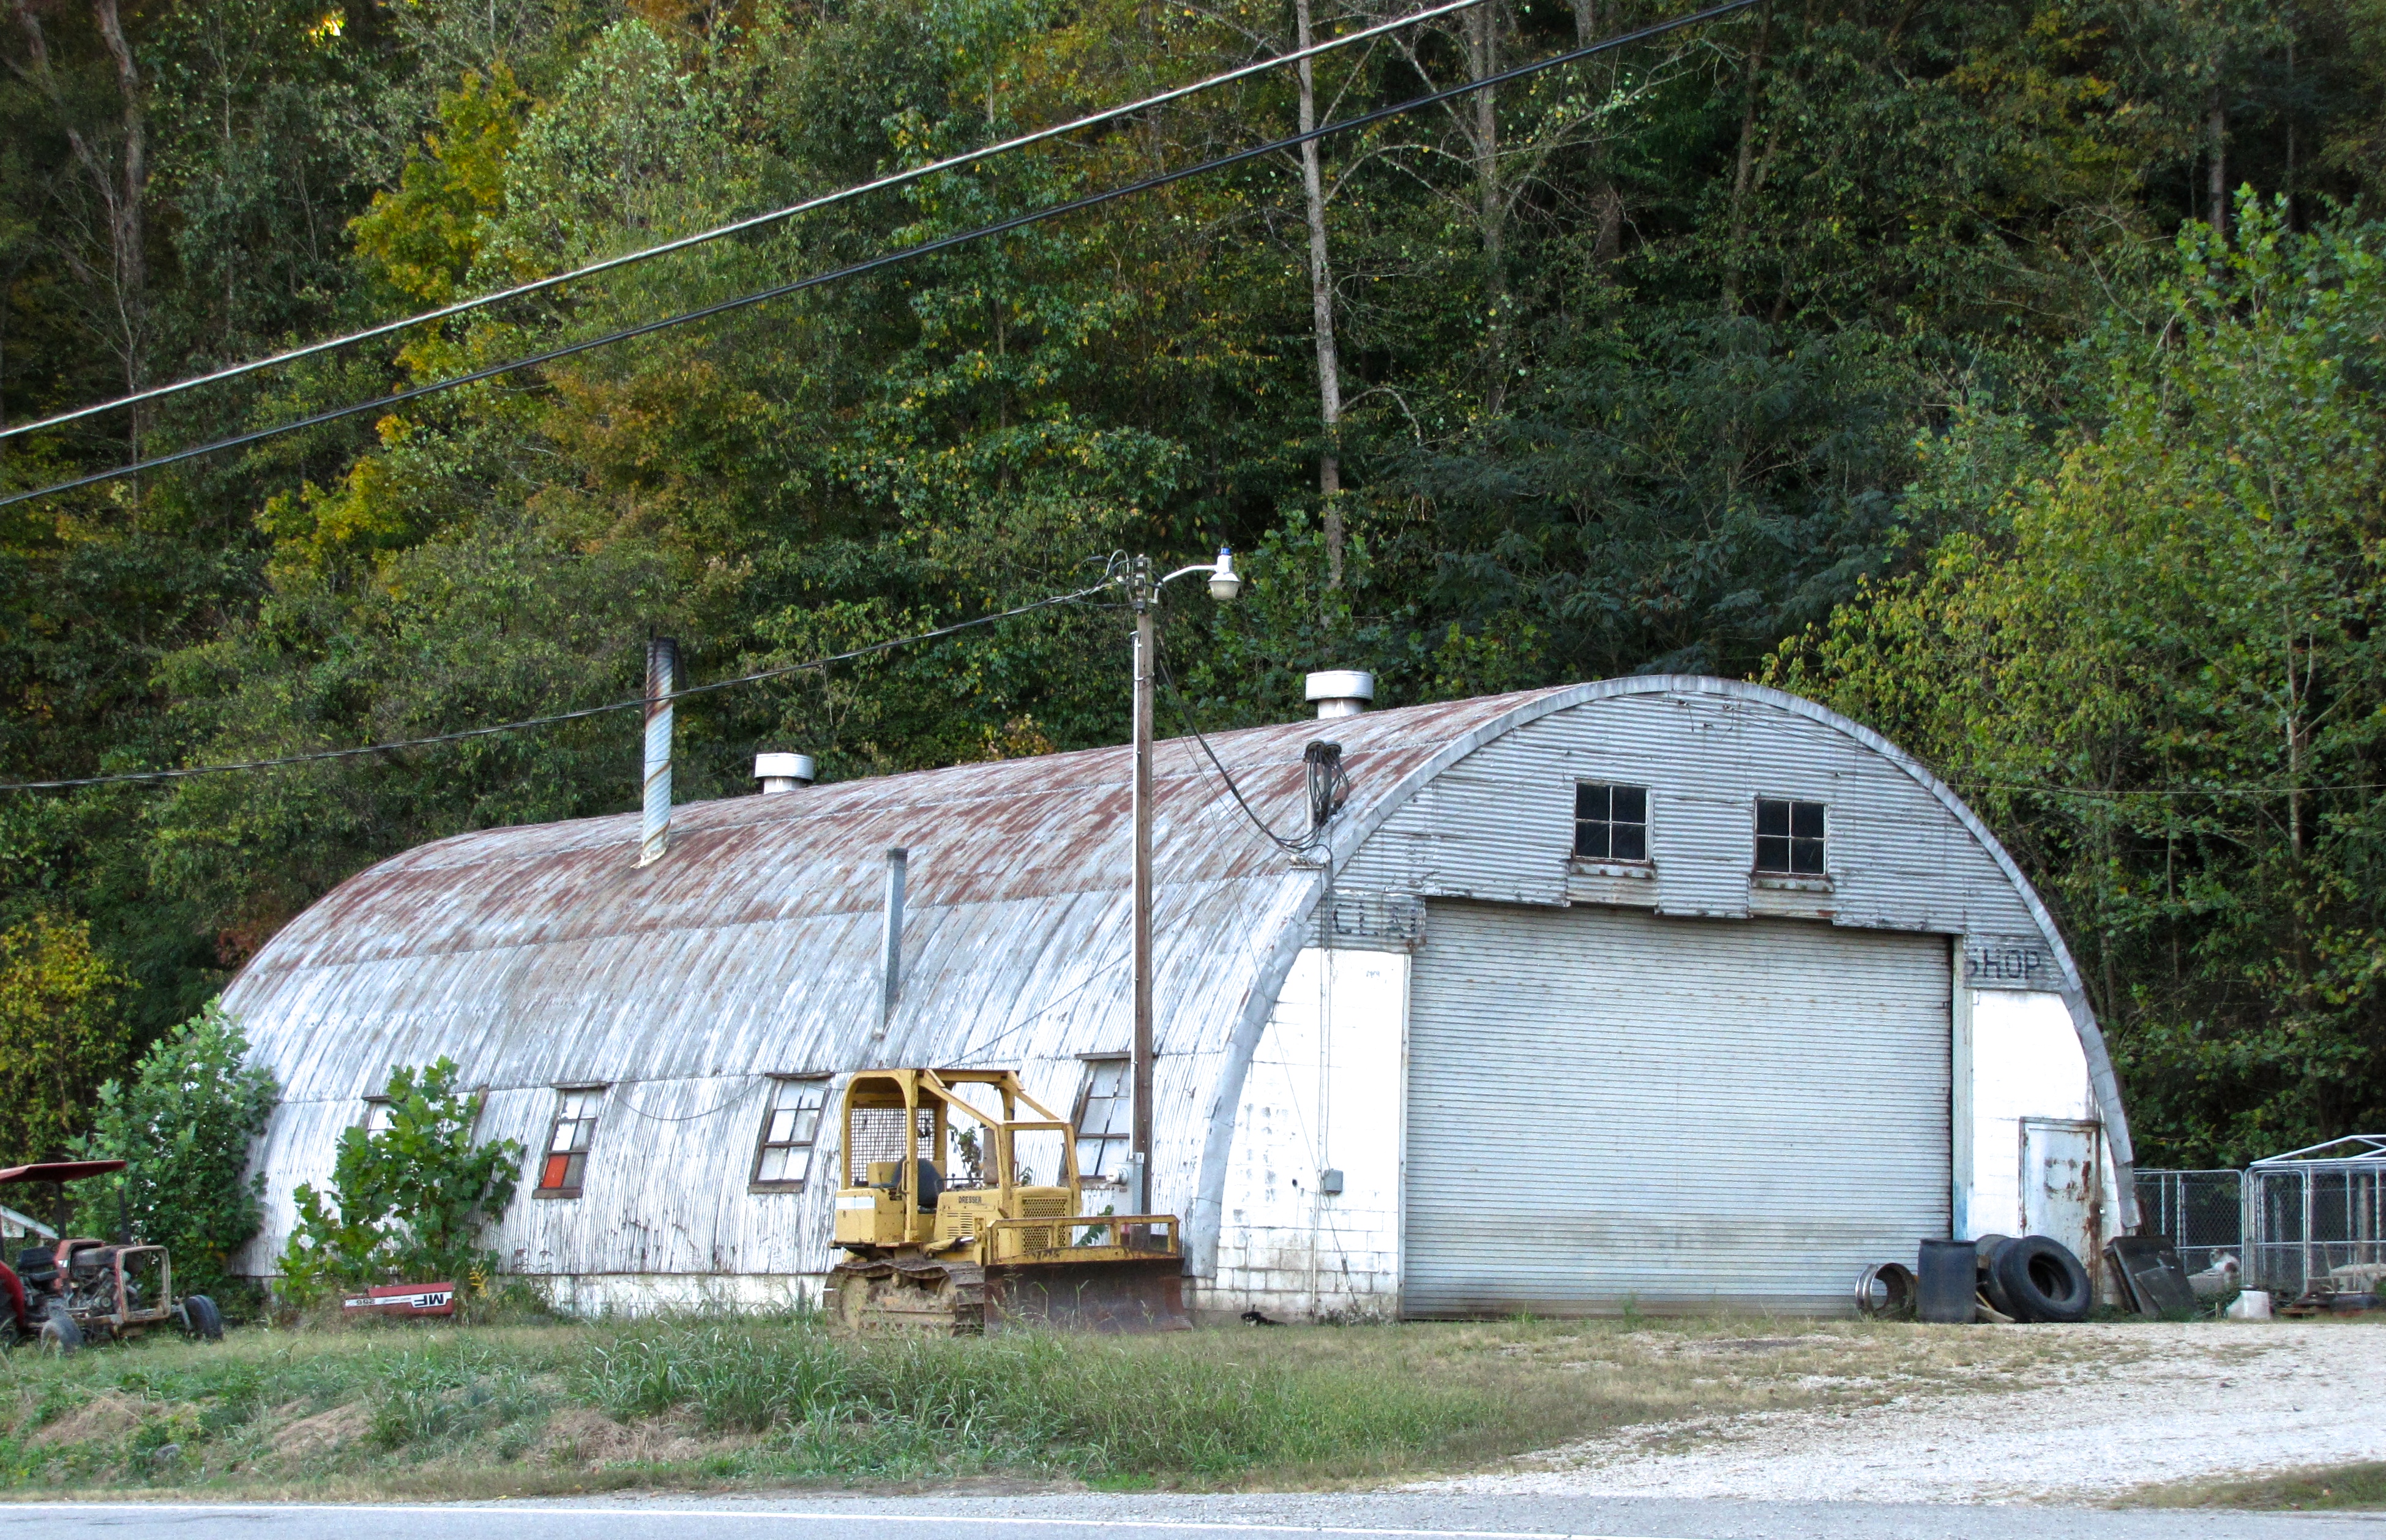 quonset hut in Covington, KY